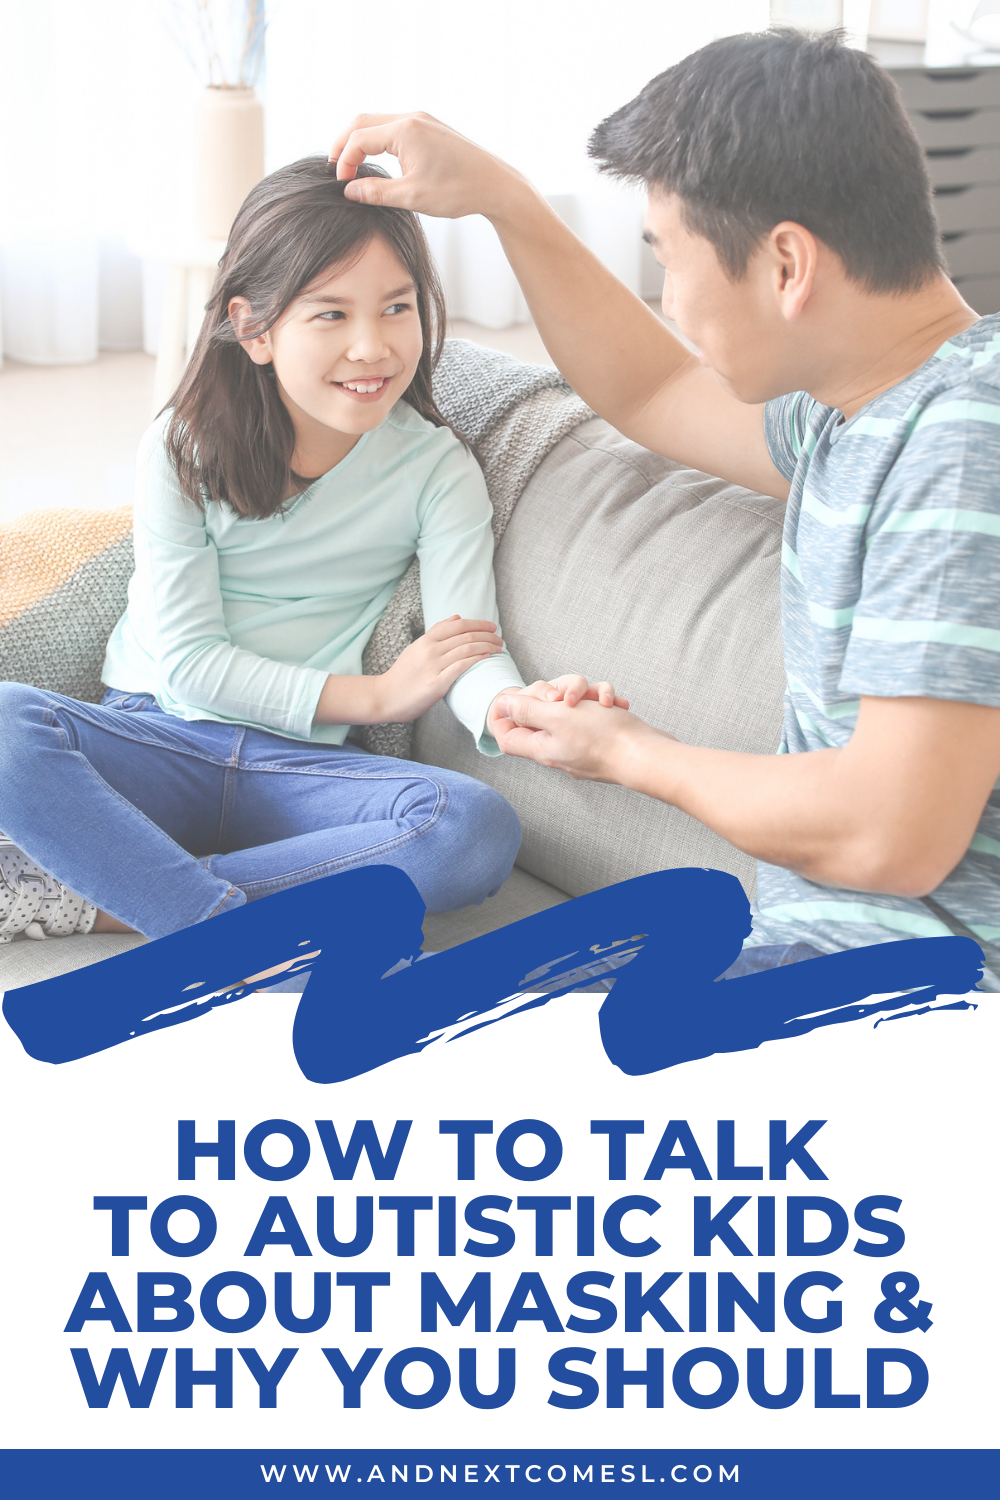 Tips for how to talk to autistic kids about masking and the reasons why you should